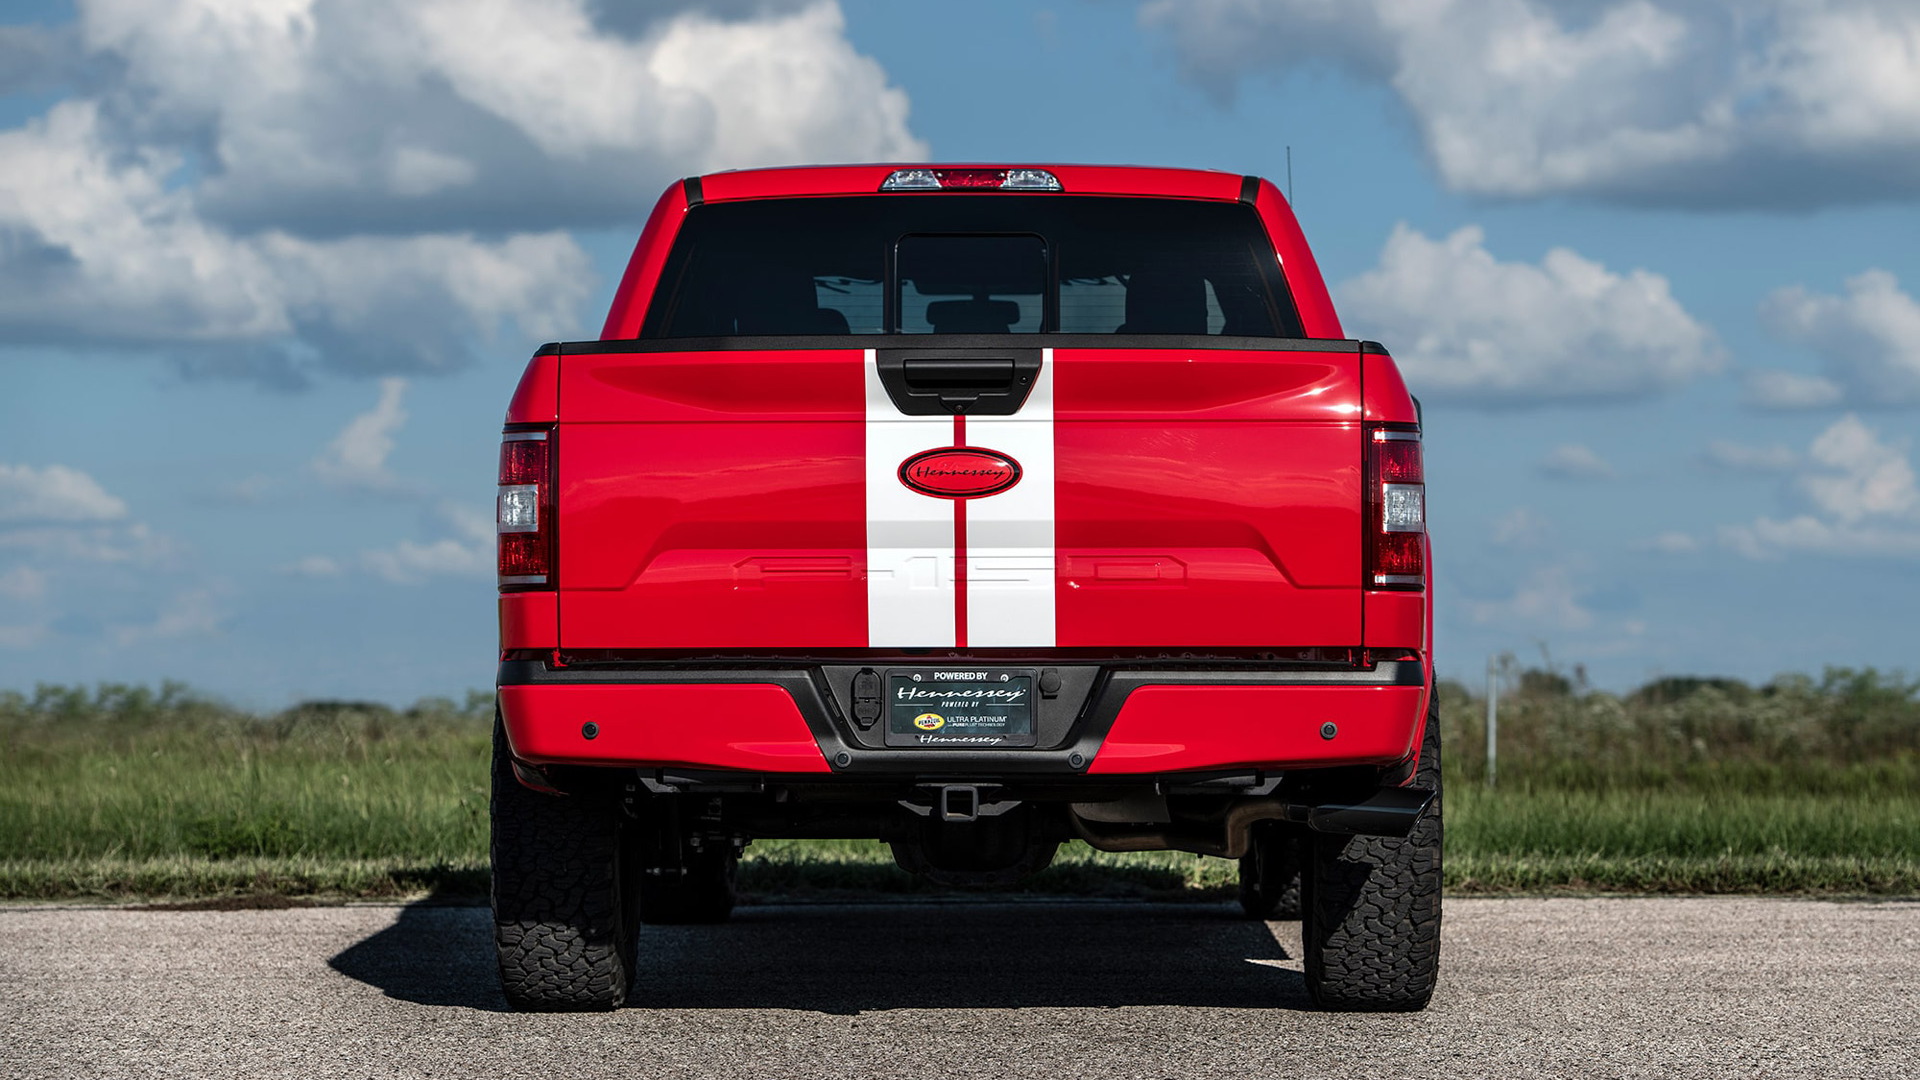 2019 Hennessey Heritage Edition Ford F-150